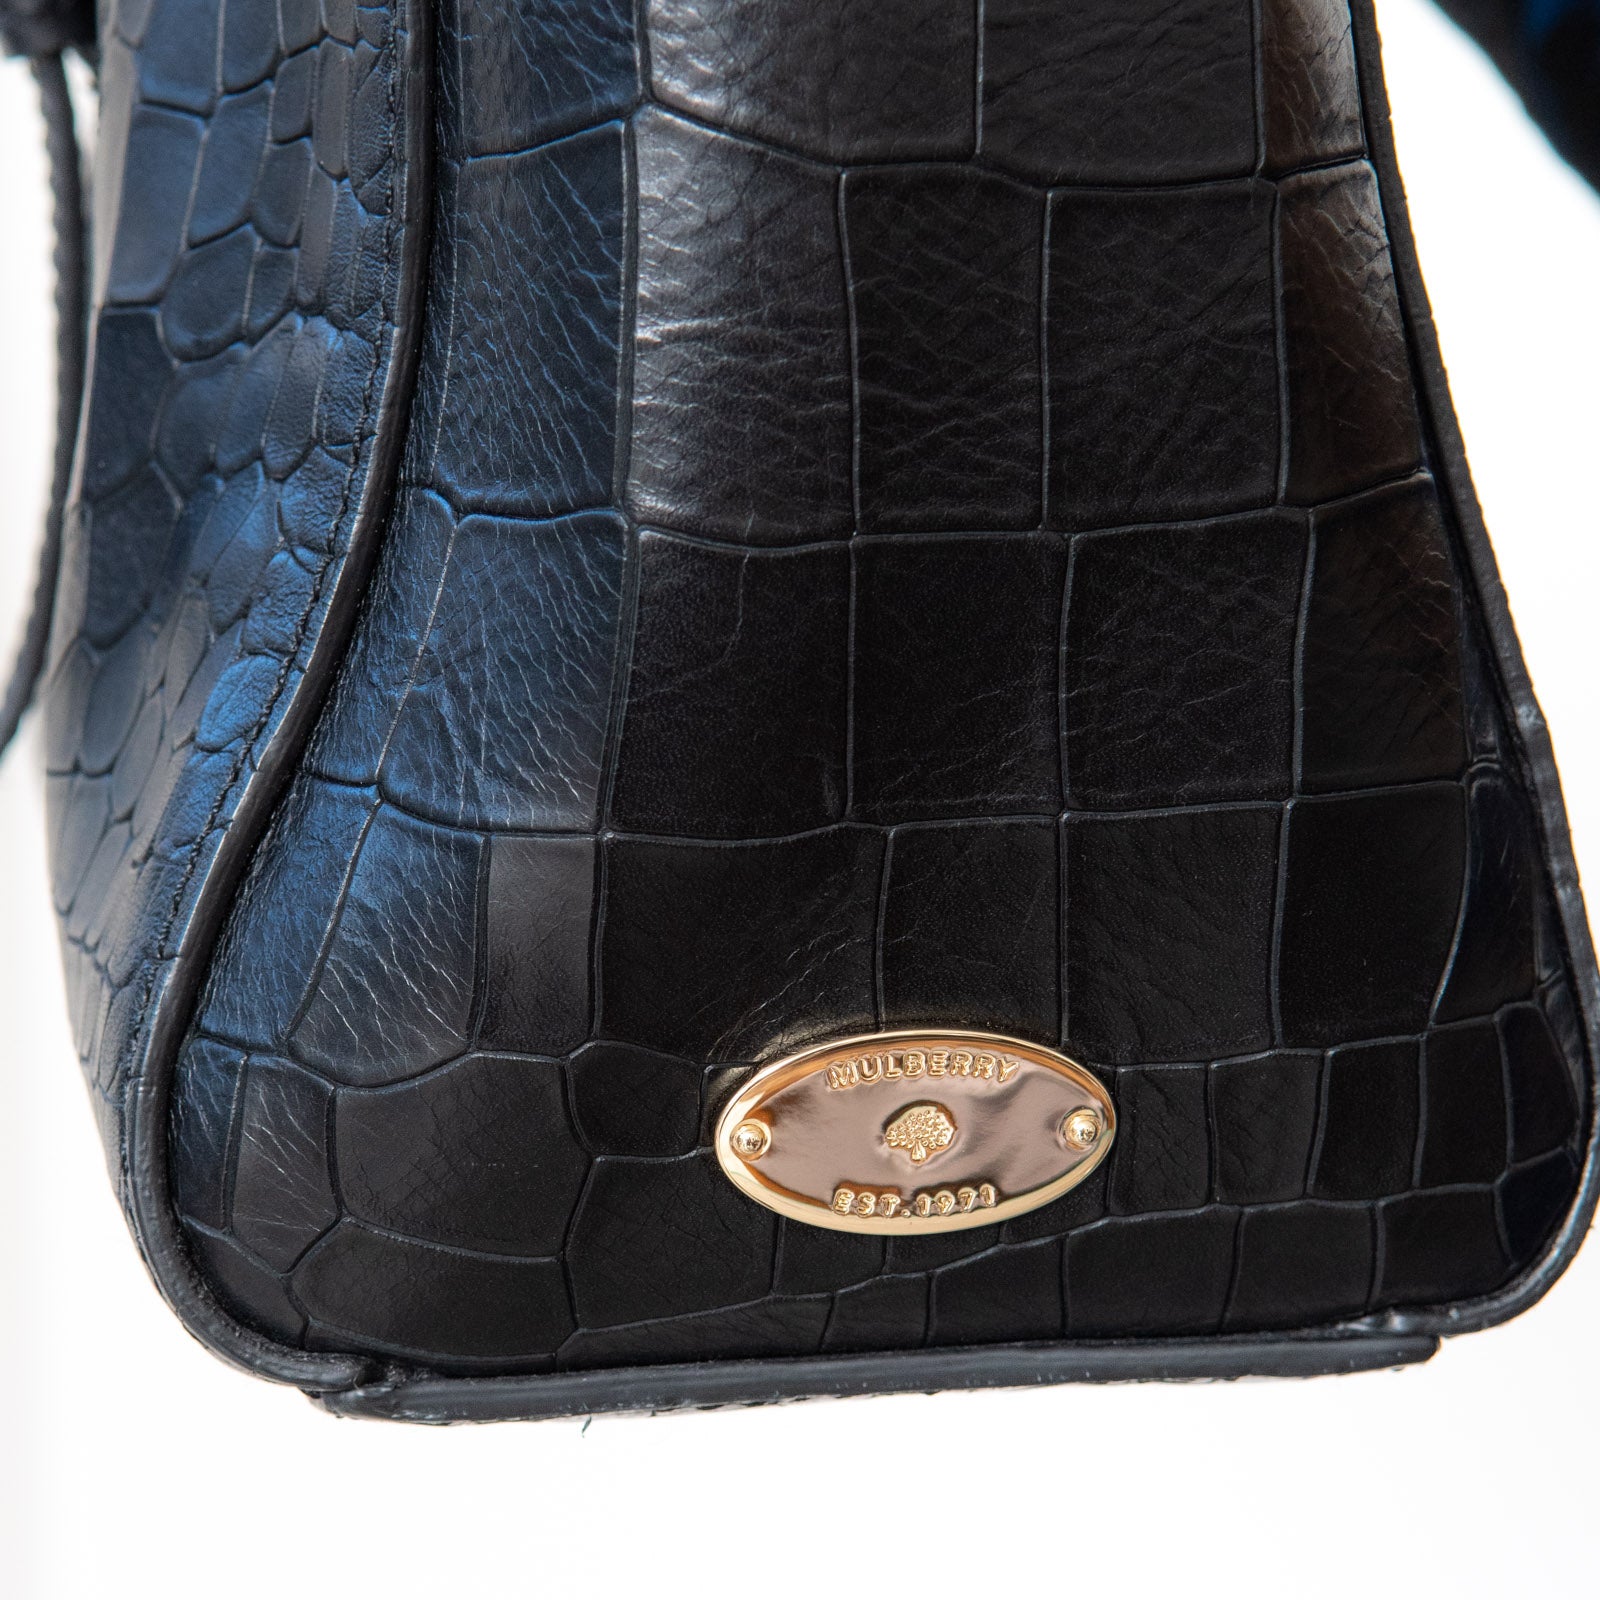 Mulberry Black Mock Croc Small Roxette Bag - Image 6 of 7